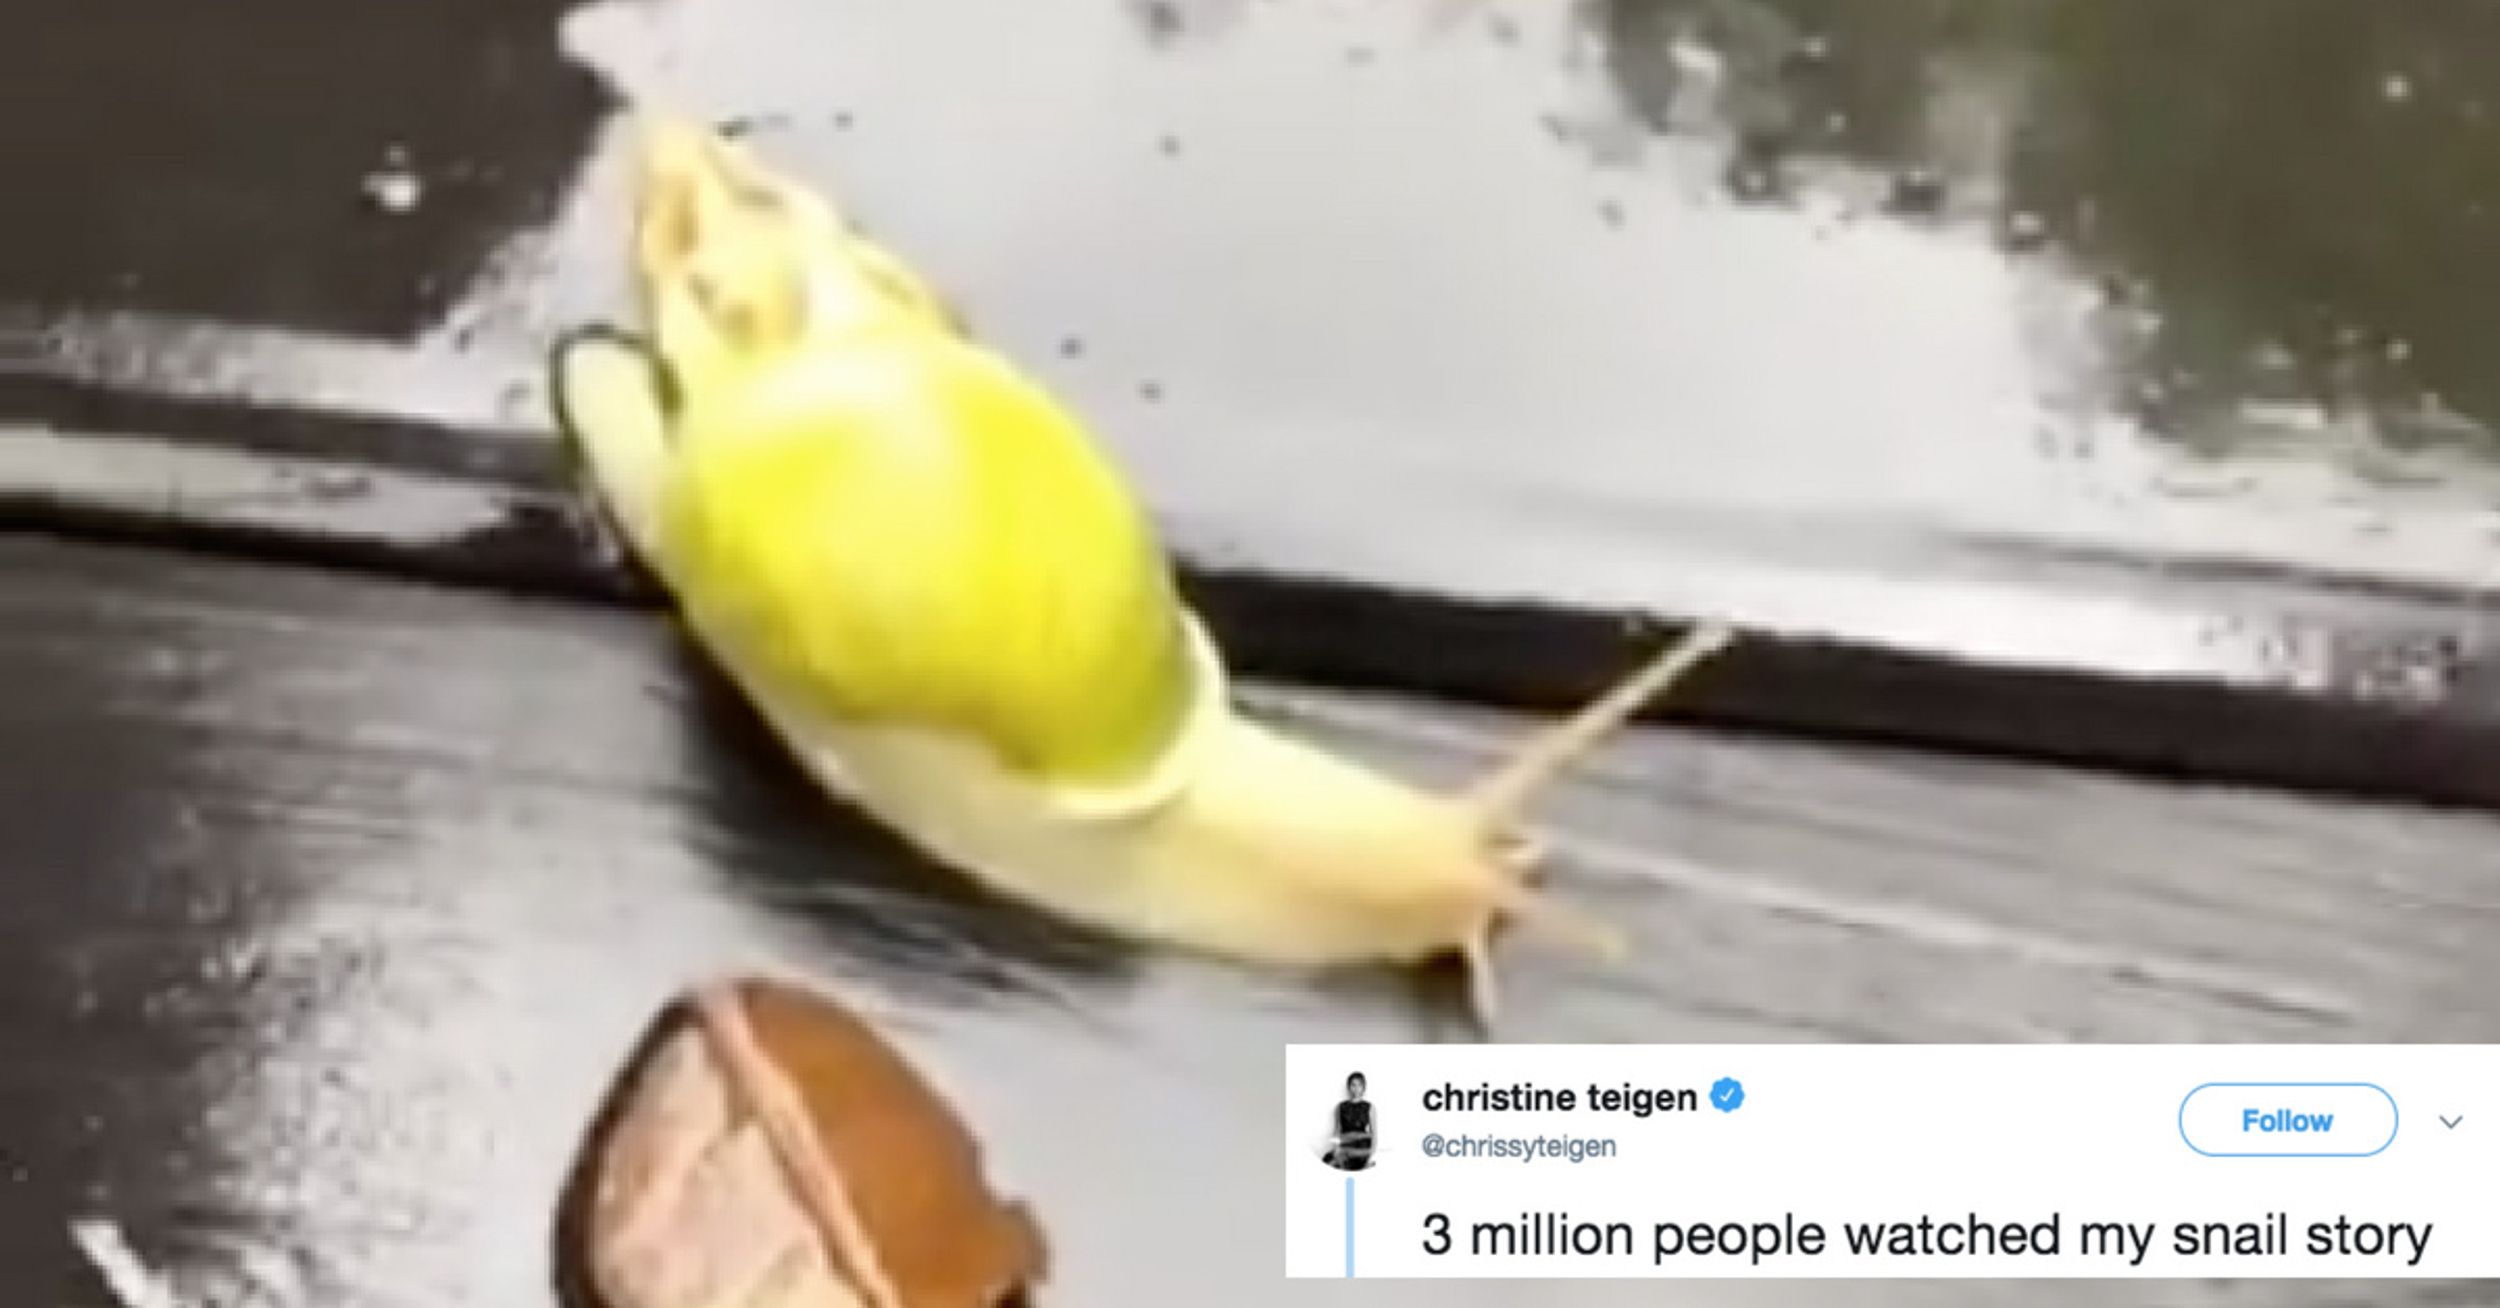 Chrissy Teigen Made An Instagram Story About A Snail That Is Way More Riveting Than It Should Be 🐌